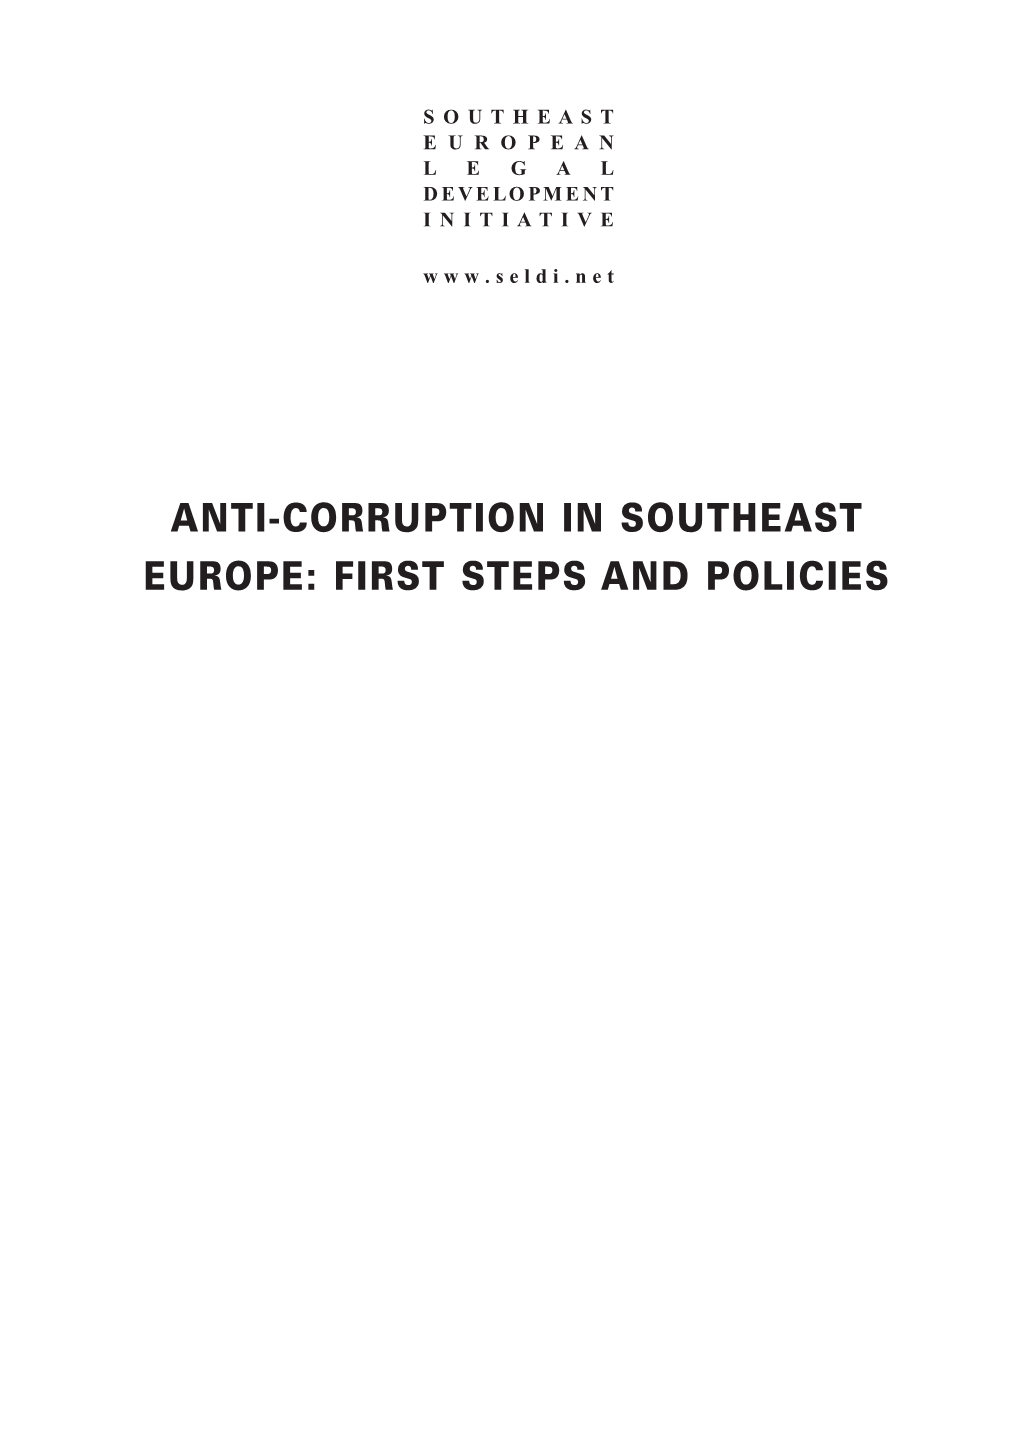 ANTI-CORRUPTION in SOUTHEAST EUROPE: FIRST STEPS and POLICIES the Southeast European Legal Development Initiative (SELDI) Was Launched in Late 1998